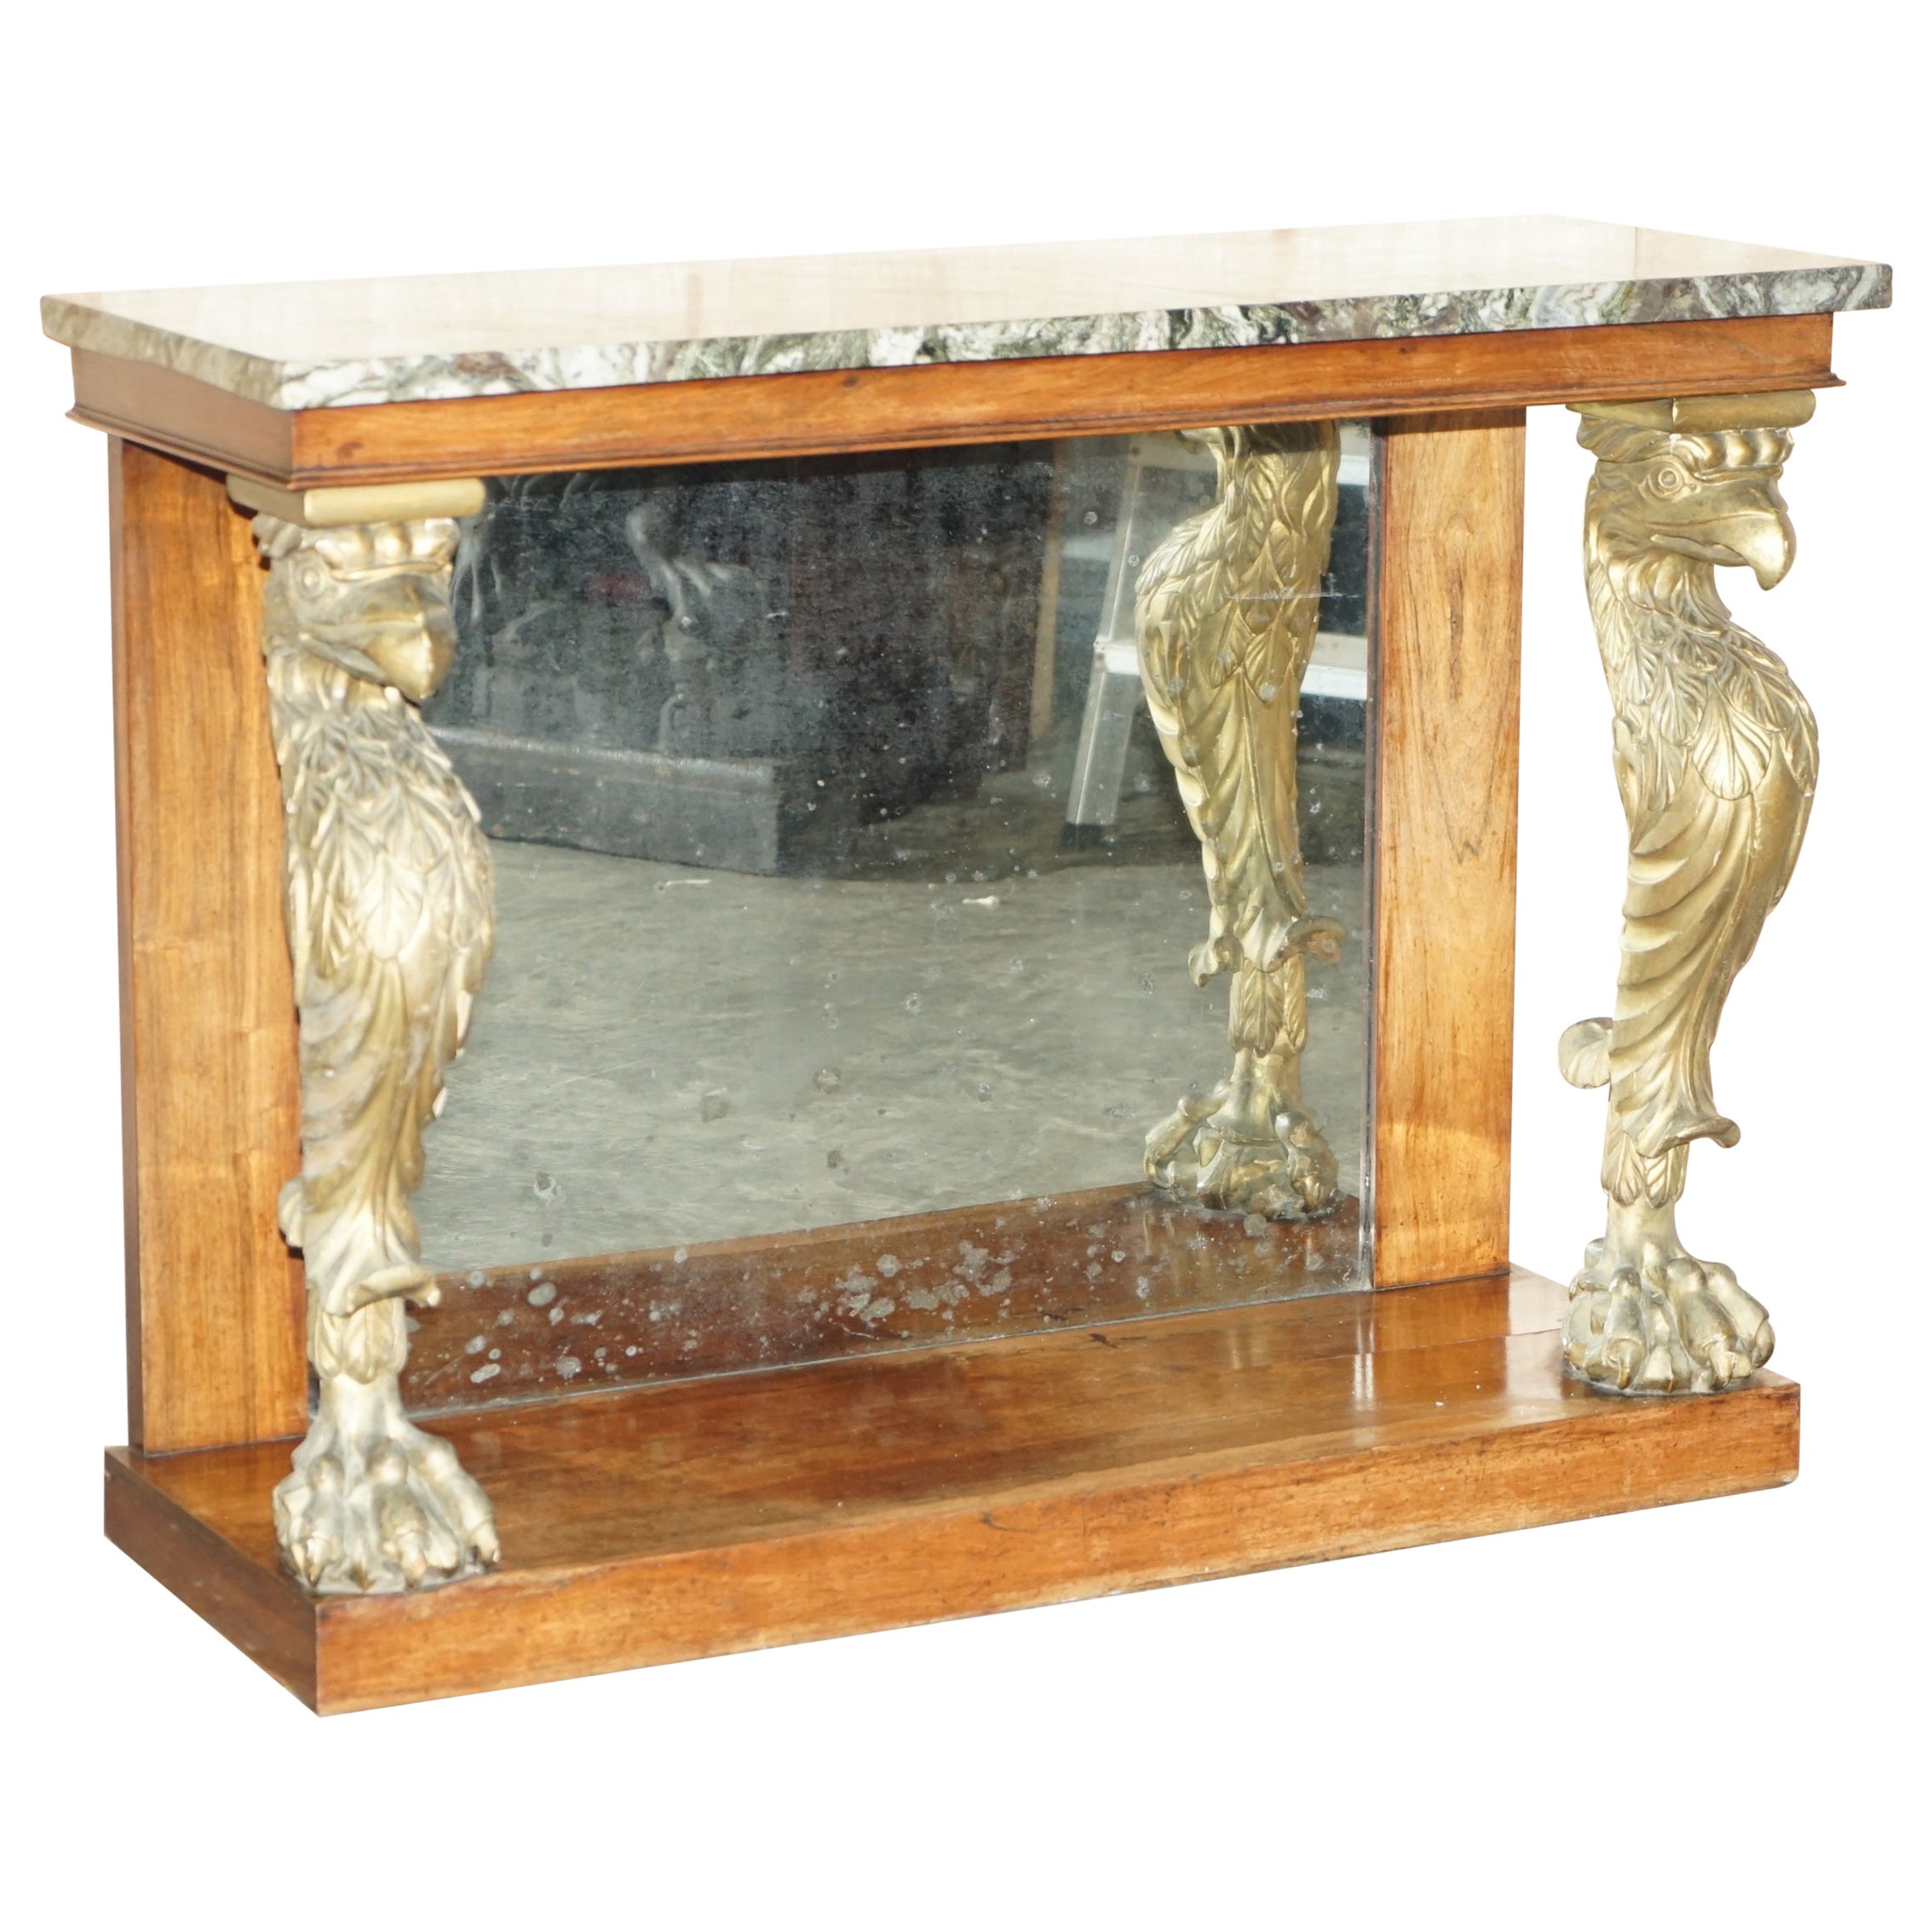 Stunning Antique Regency Hardwood Giltwood & Marble Eagle Carved Console Table